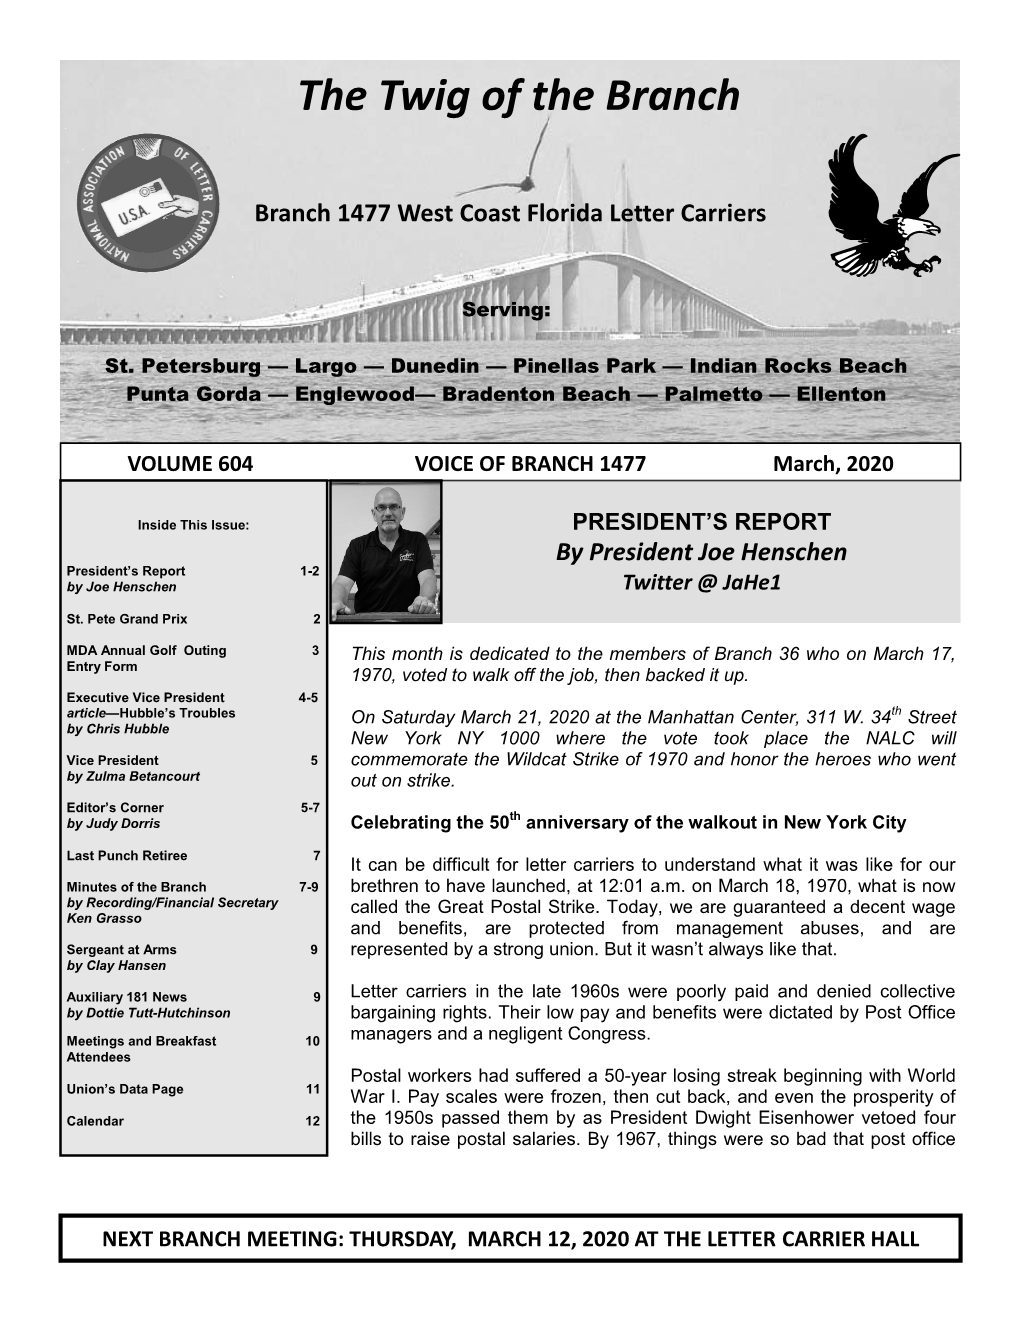 The Twig of the Branch Branch 1477 West Coast Florida Letter Carriers